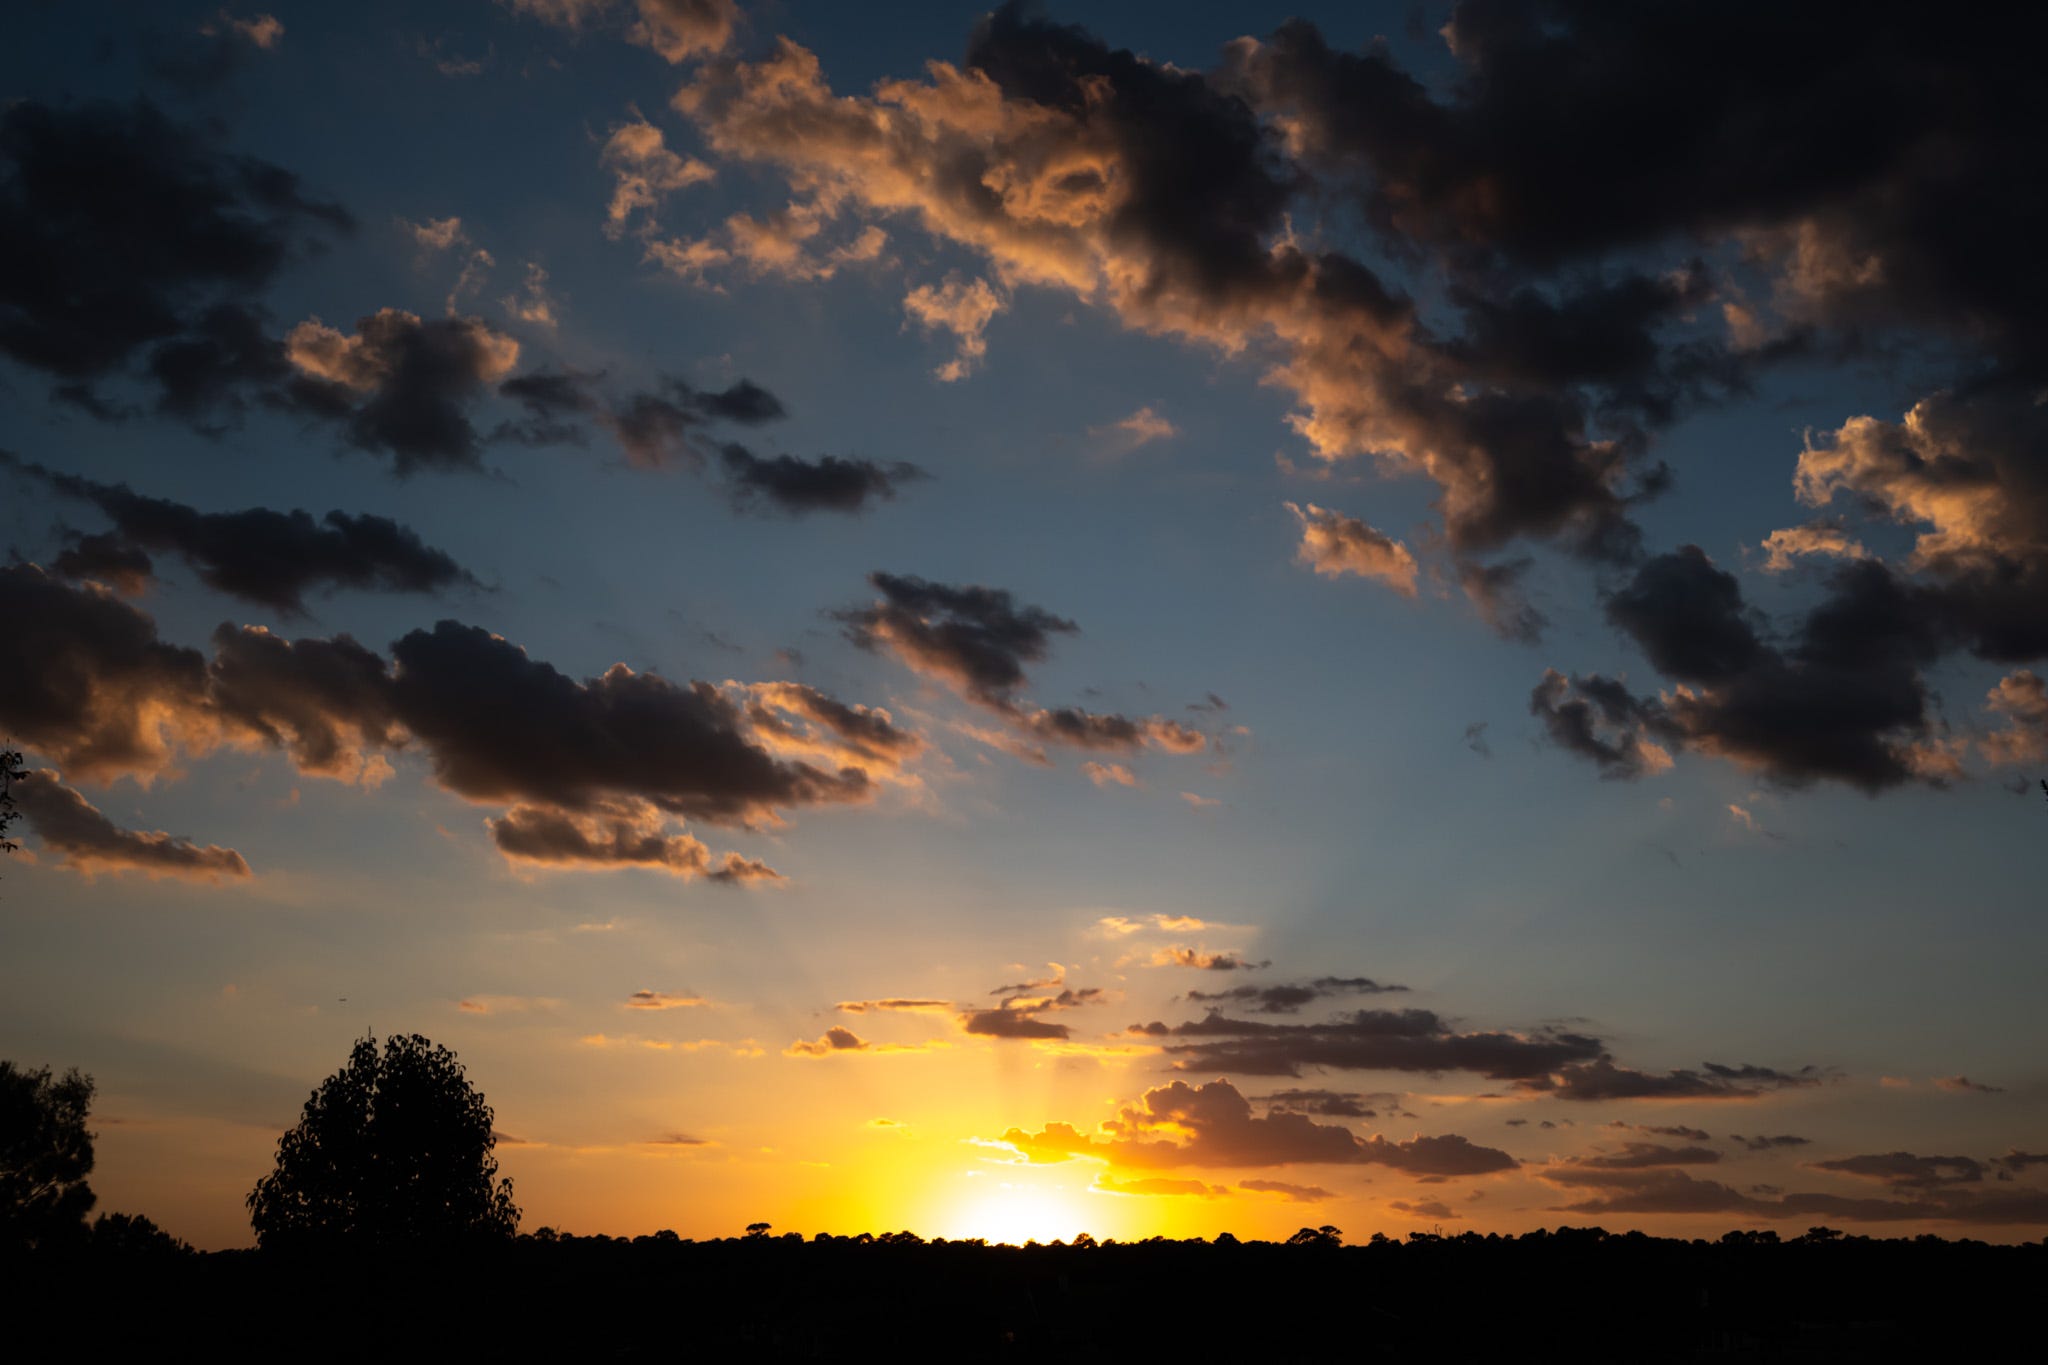 sunset with the rays of the sun backlighting the clouds above; the dark horizon broken by the silhouette of trees on the left